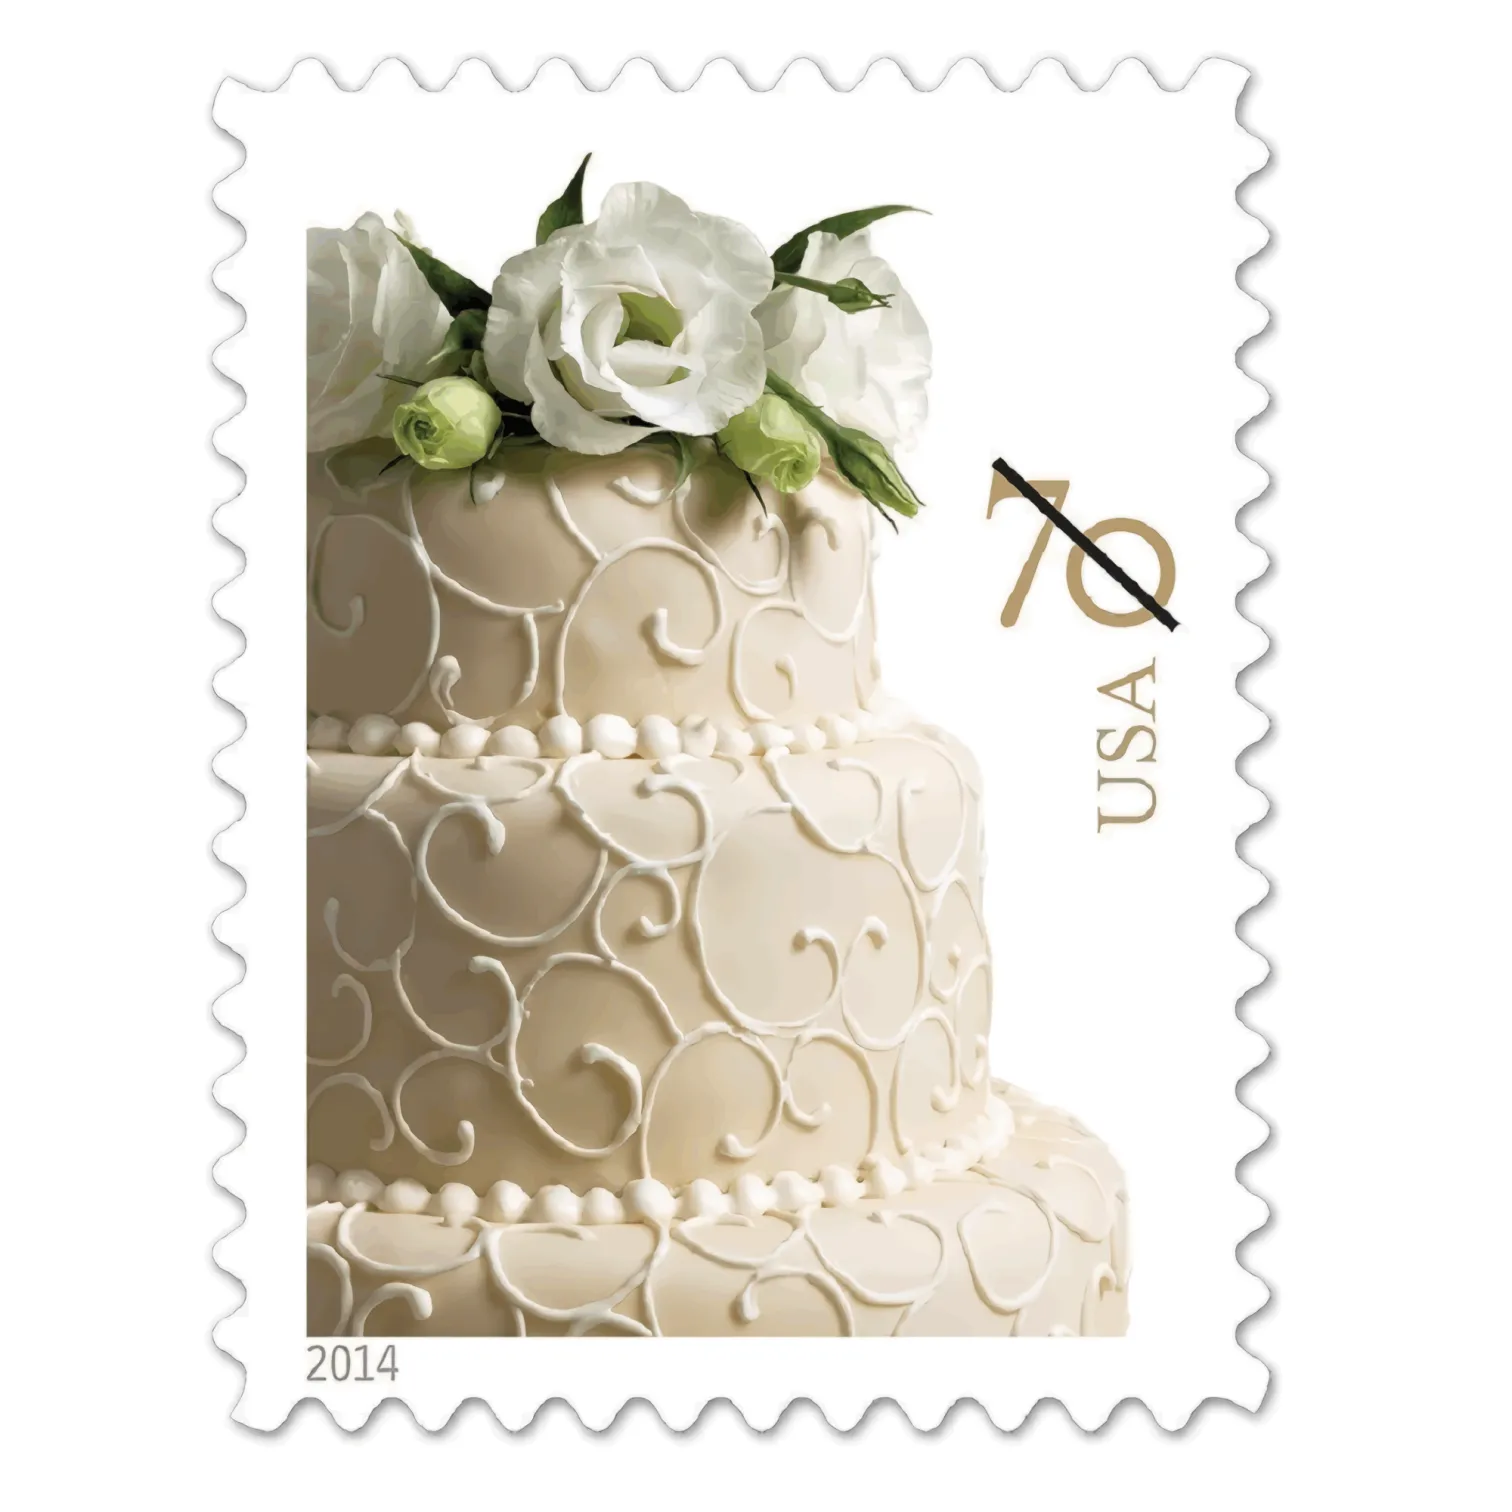 FIVE 2018 Love Stamps - US Postage Stamps -For Mailings, Weddings